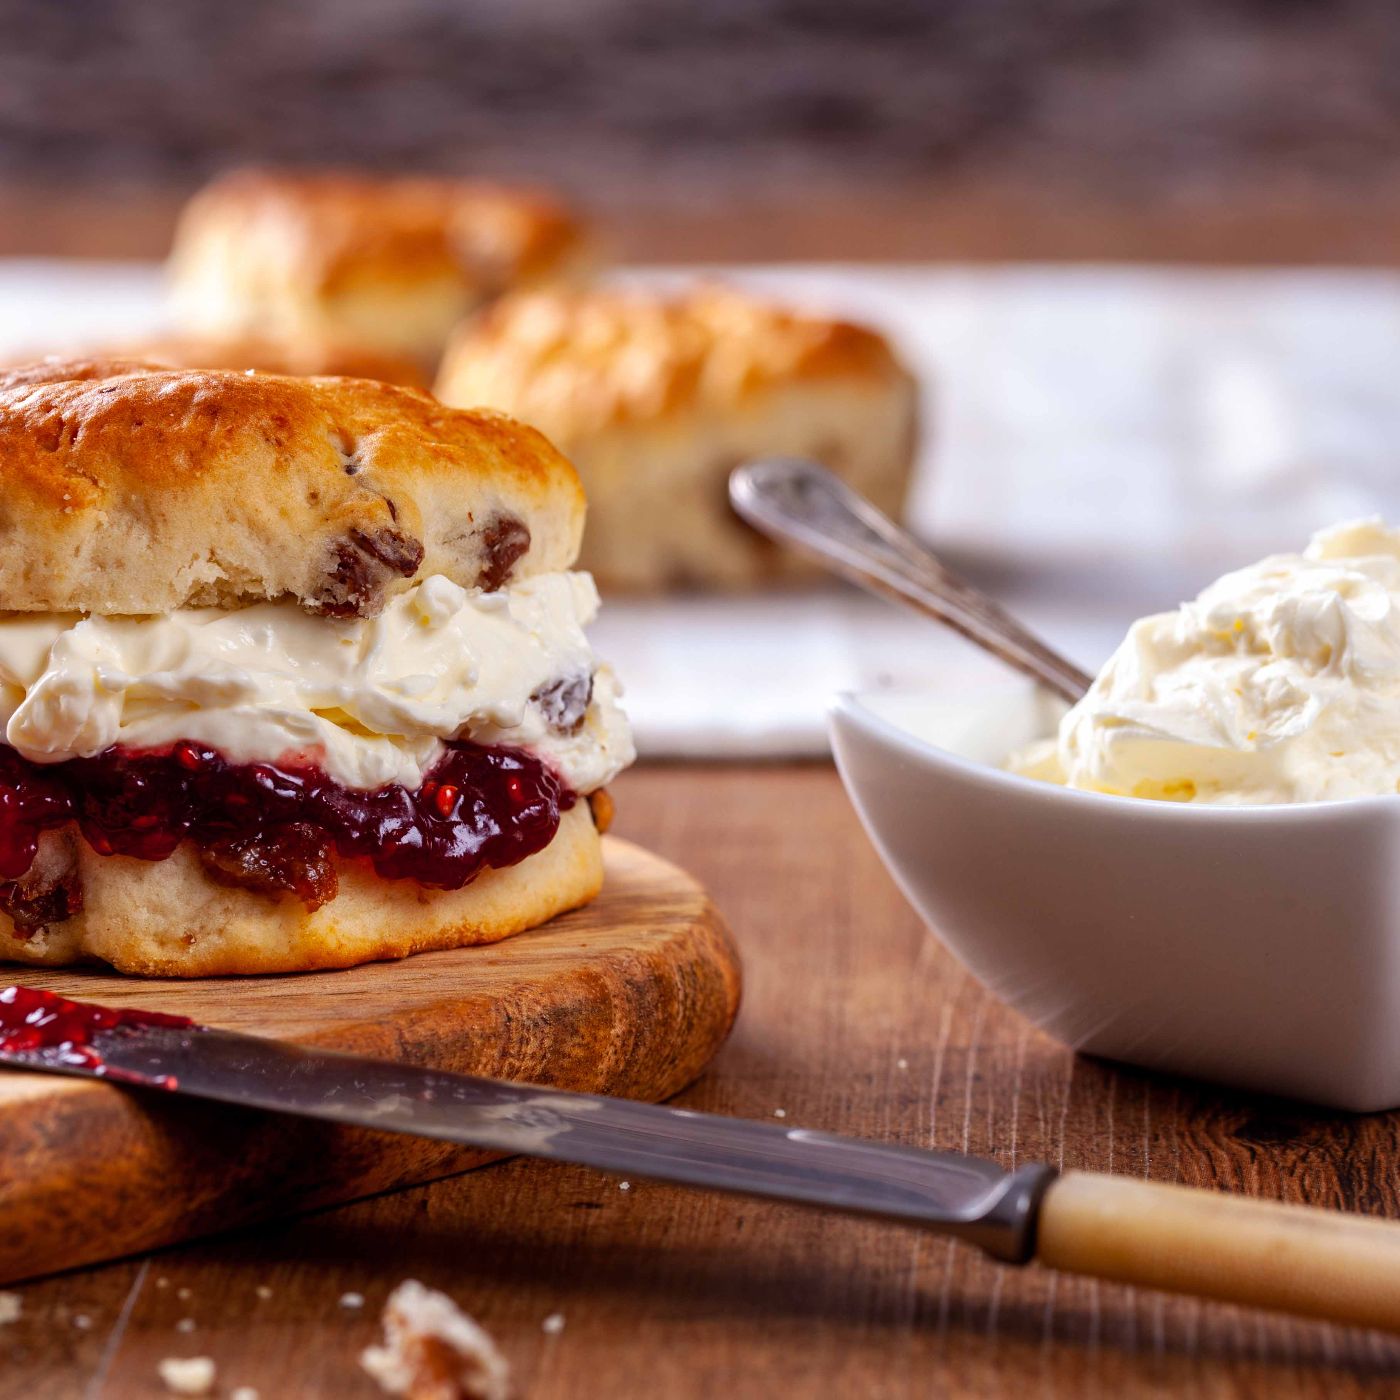 Scones-with-Strawberry-Jam-and-Clotted-Cream-959875000_5449x3633_square.jpg